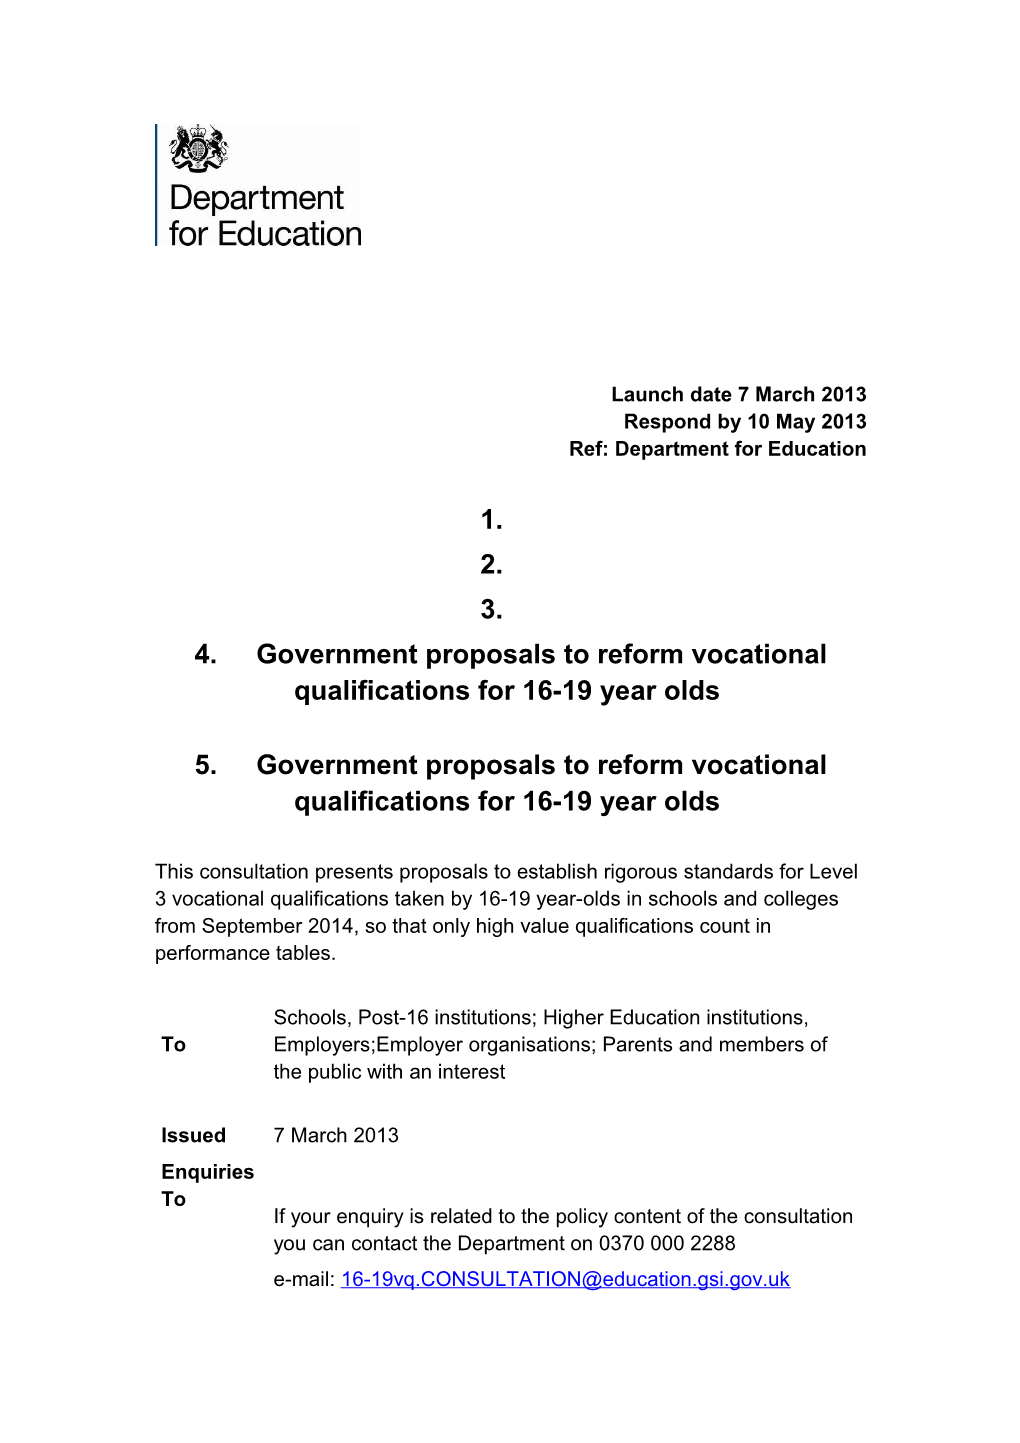 Government Proposals to Reform Vocational Qualifications for 16-19 Year Olds